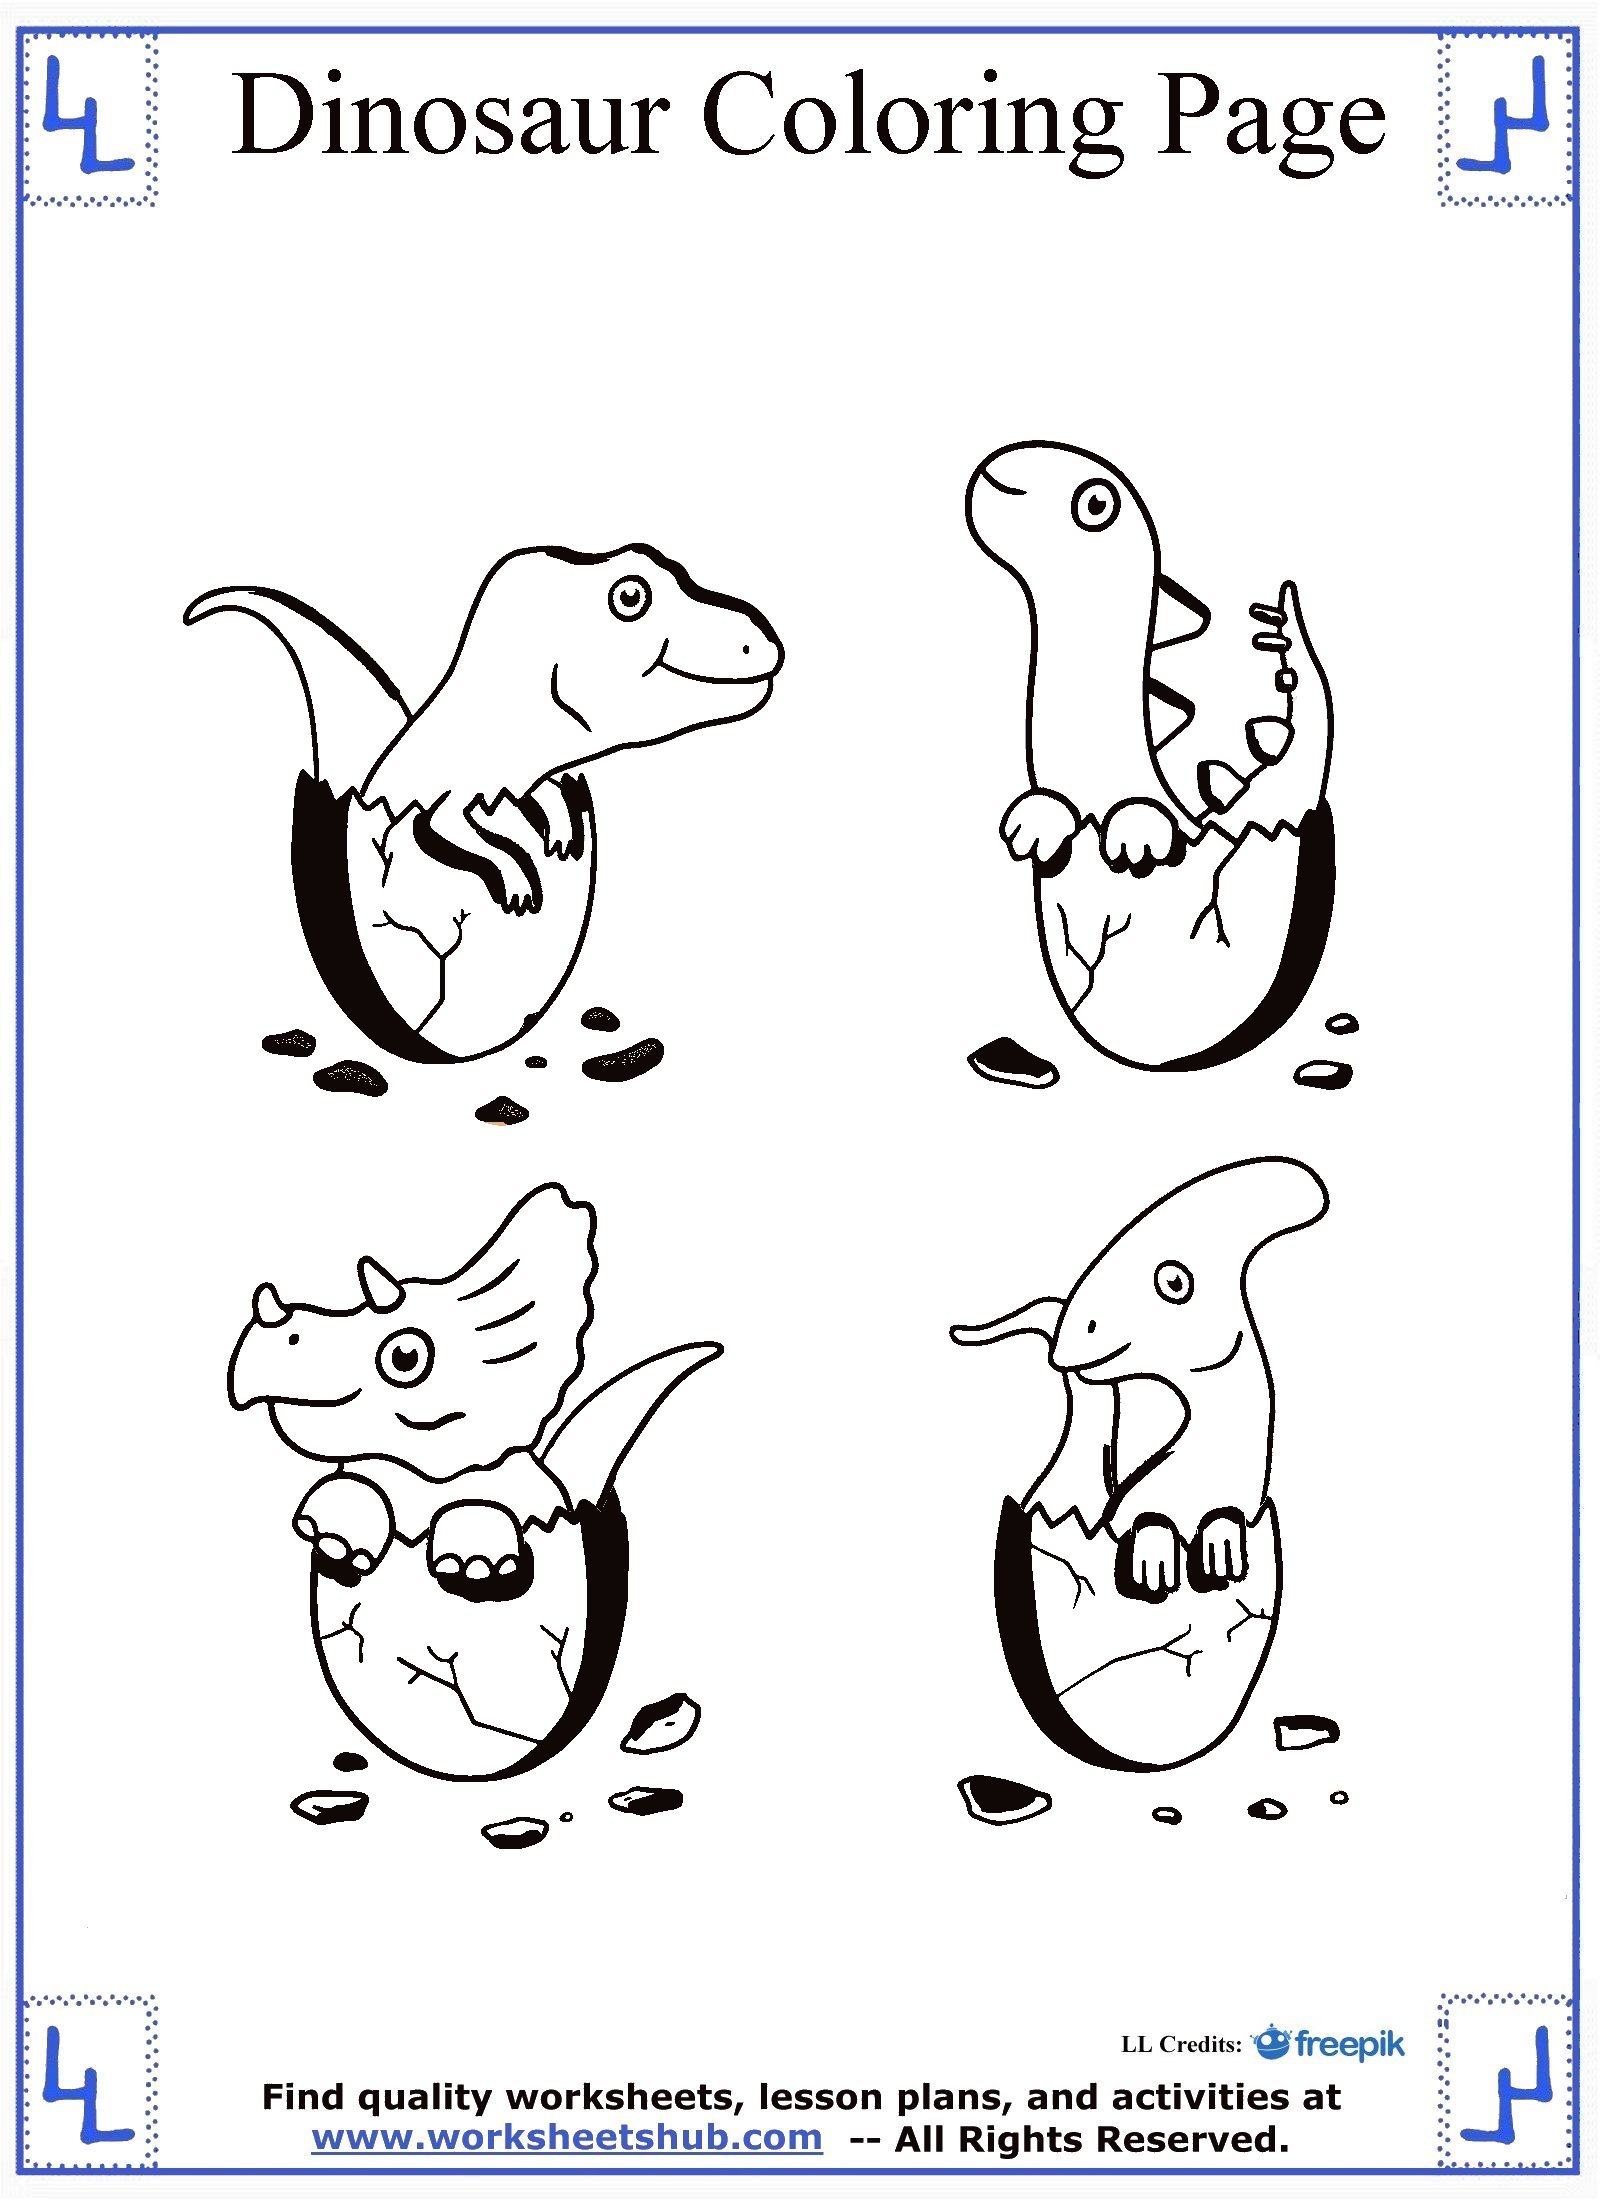 small dinosaur dinosaurs kids coloring pages - dinosaur coloring pages ...